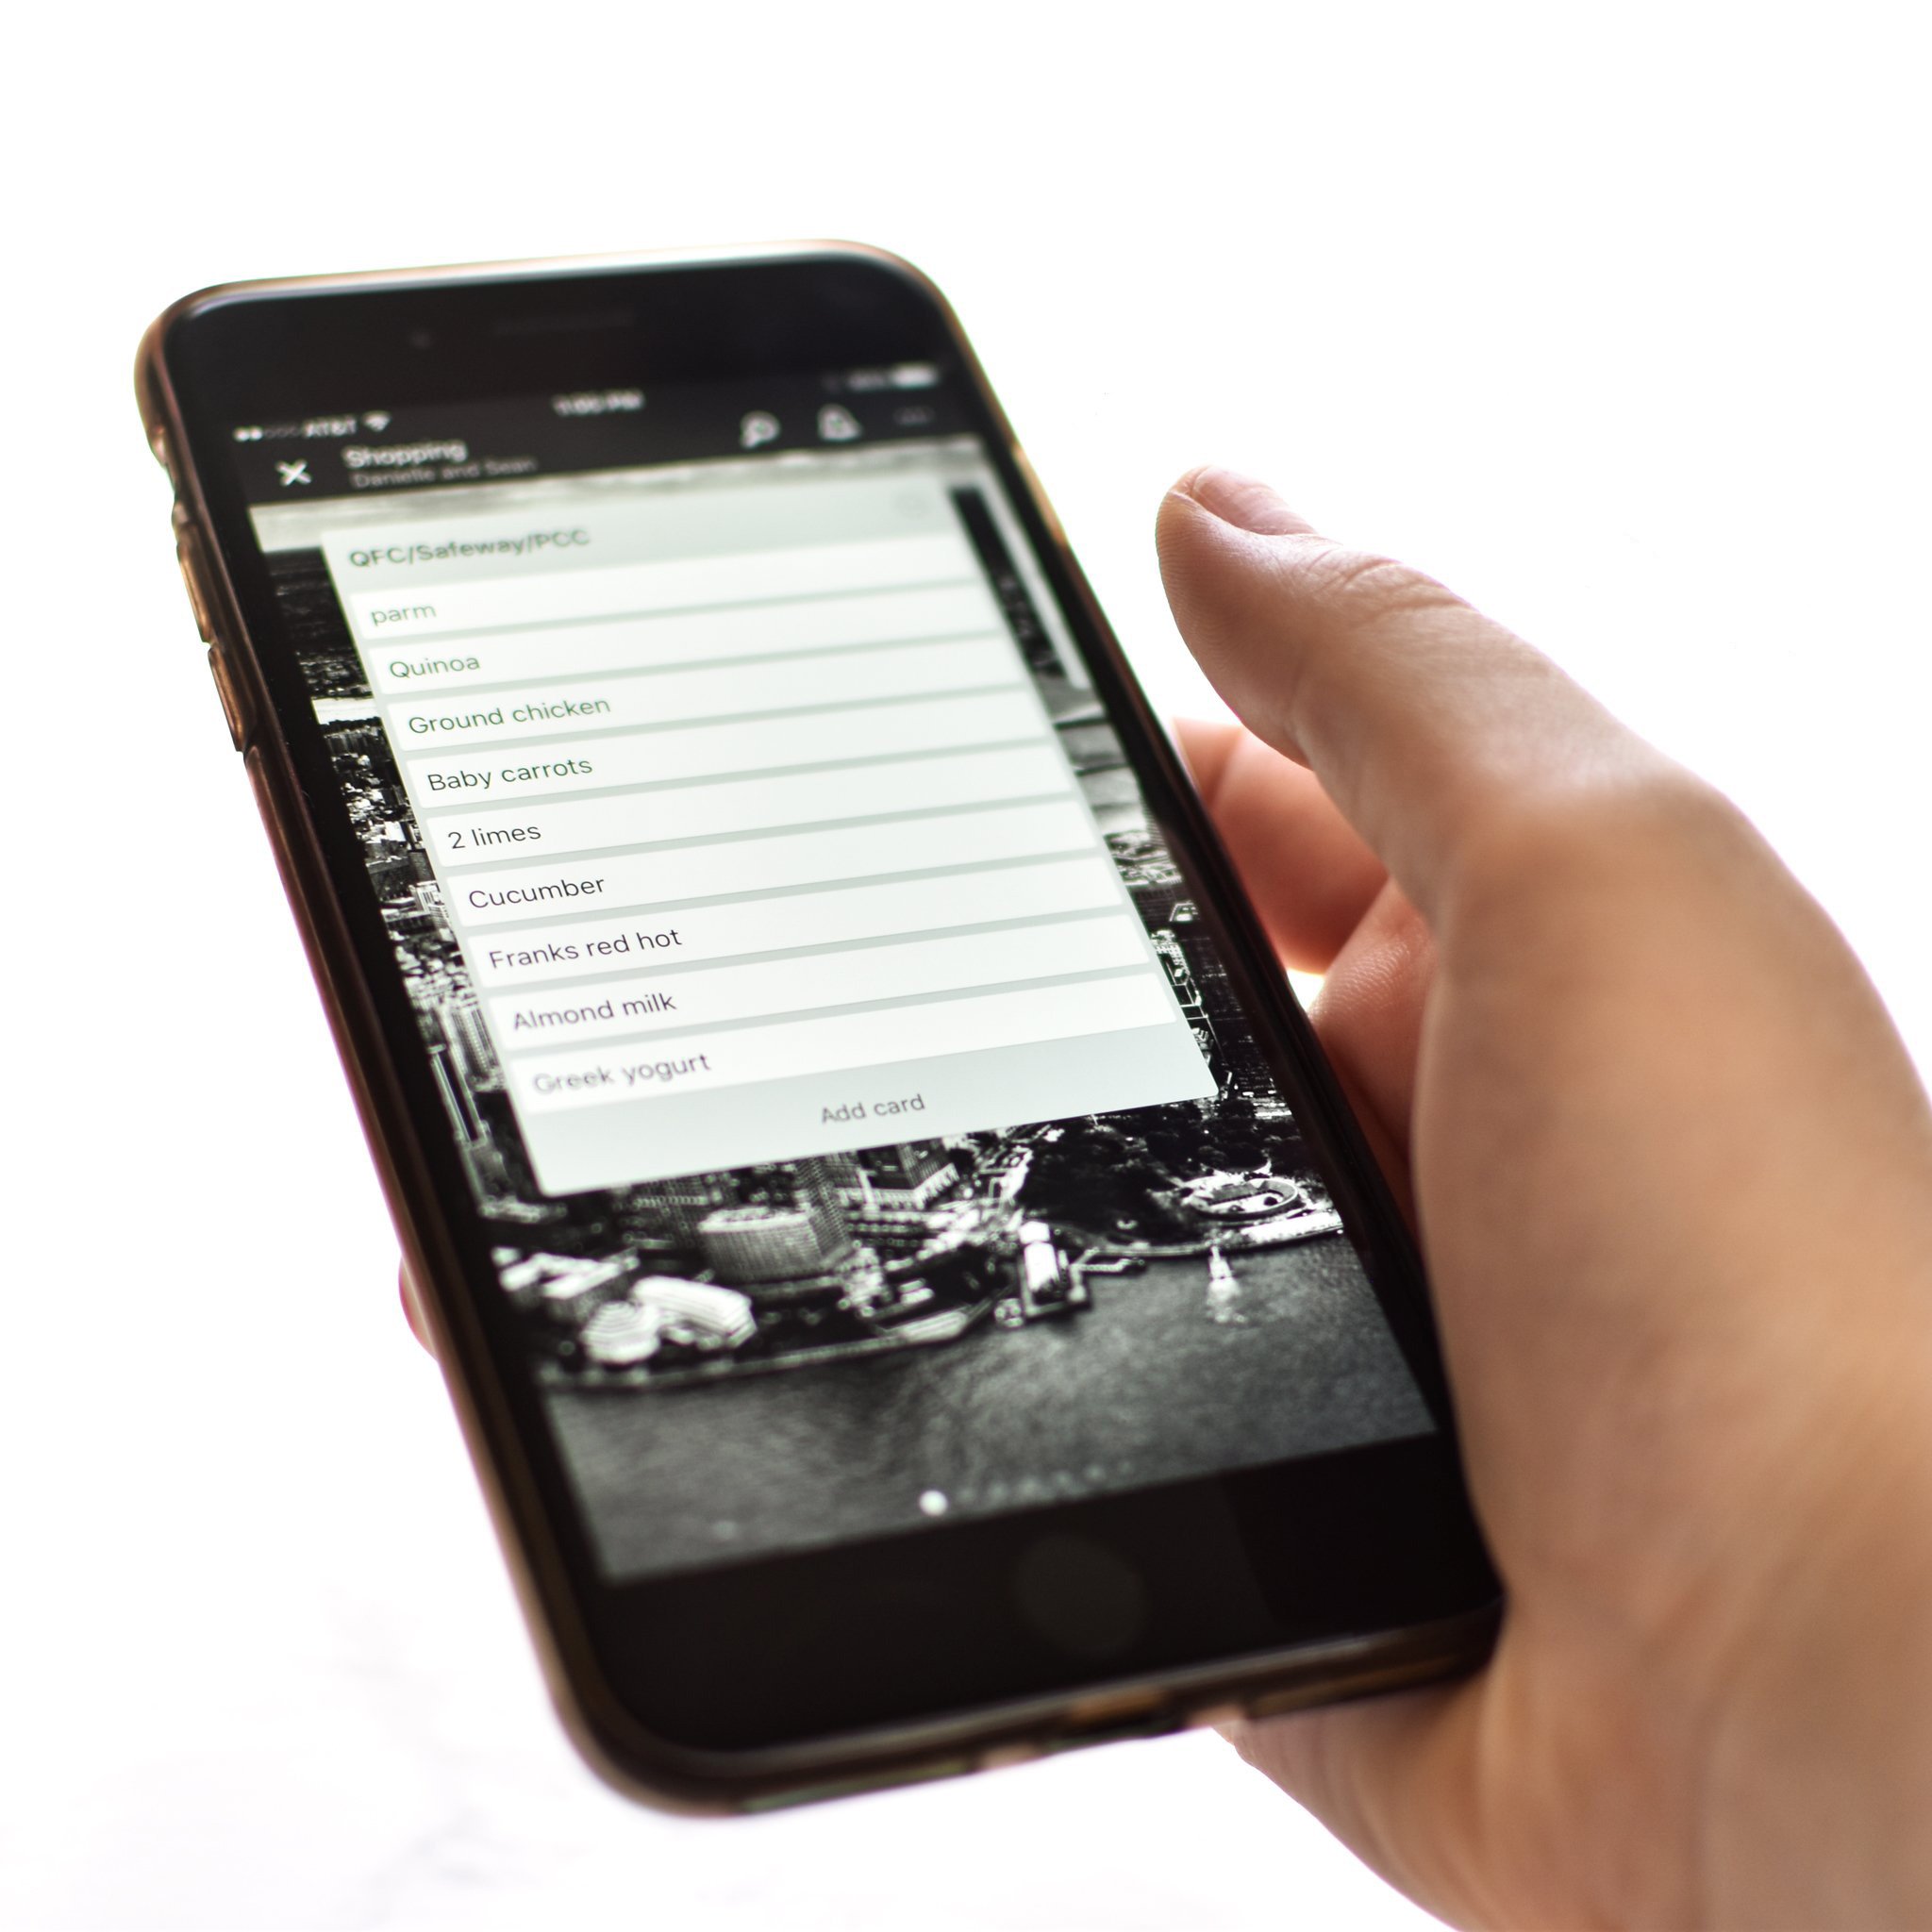 Holding a phone with a shopping list displayed using the app Trello.